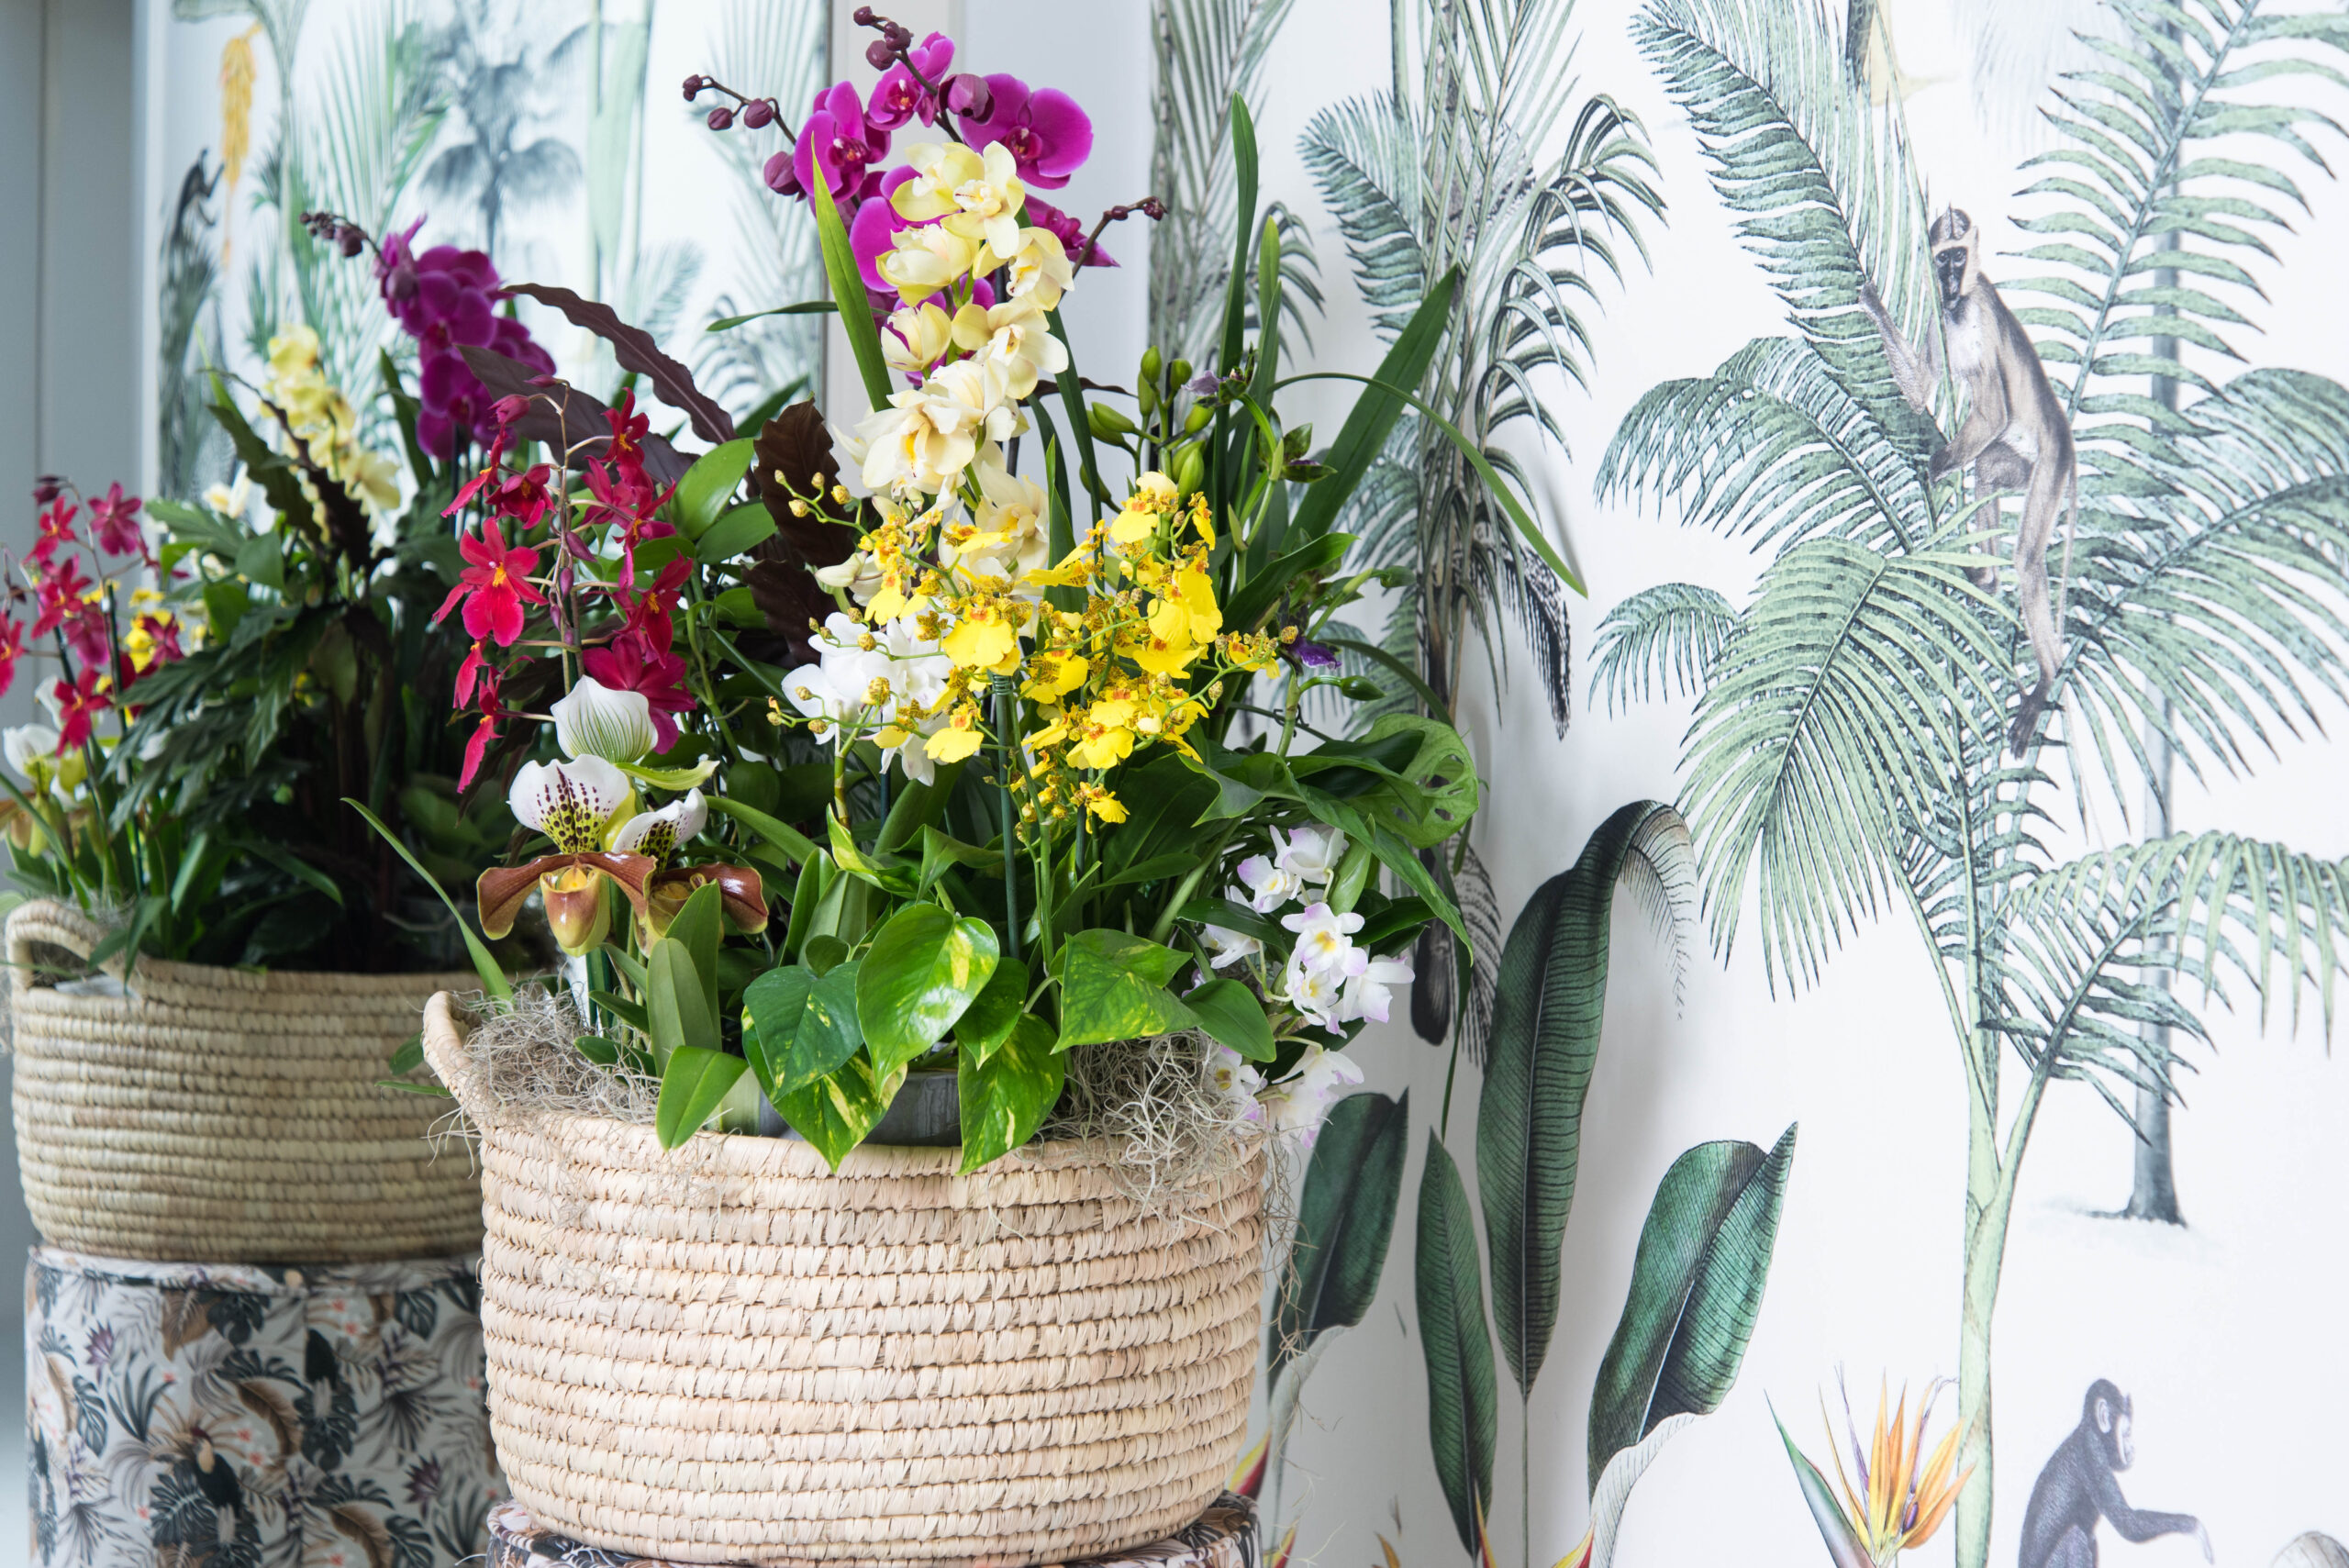 What should you not do with an orchid? 4 tips